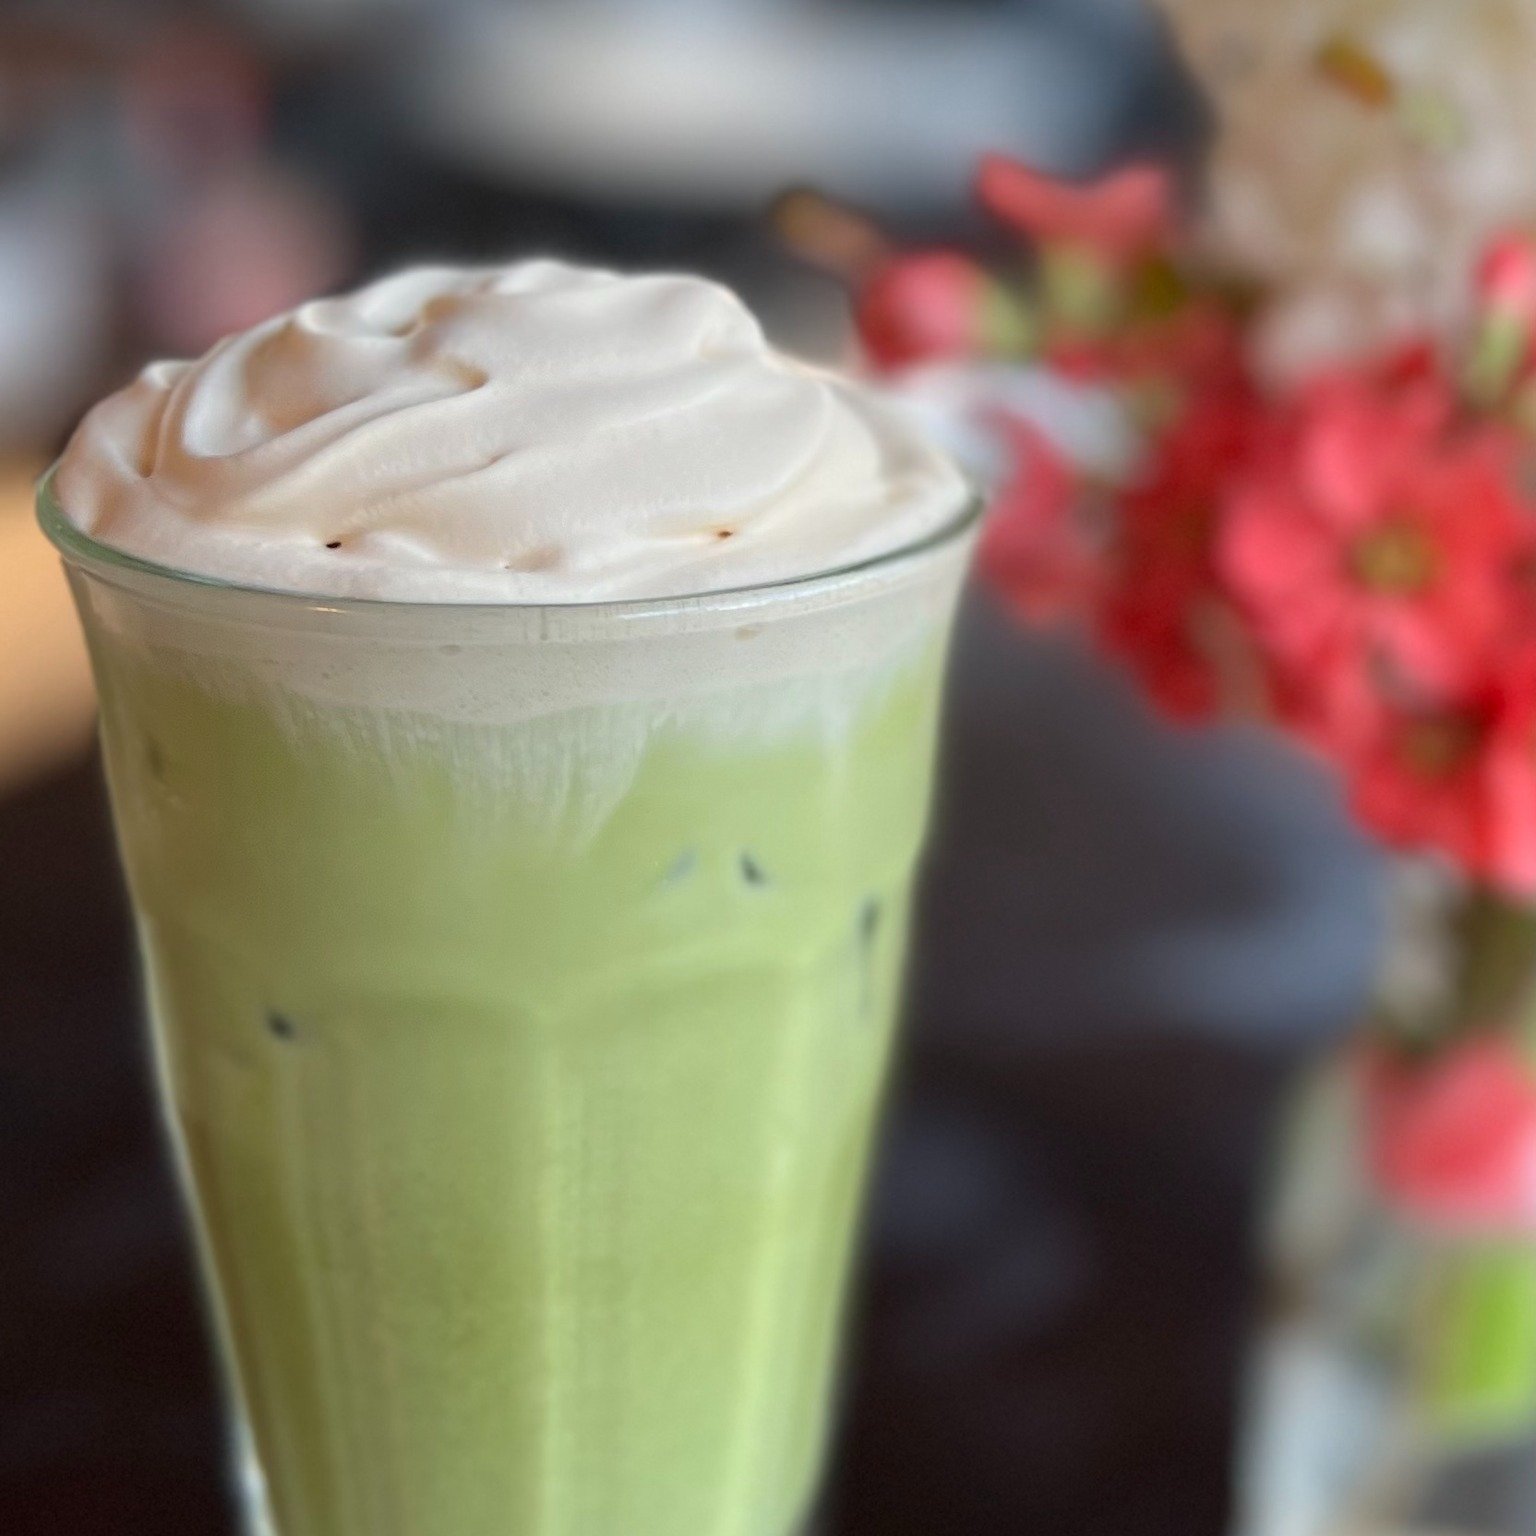 New spring drinks have dropped! We are excited to bring you unique flavors to bring on sunny days. Take a look: 

** Ube Dark Chocolate Cold Brew w/ Ube Cold Foam
** Sea Salt Caramel Toffee Latte
** Brown Sugar Honey Matcha Latte w/ Black Sugar Whipp